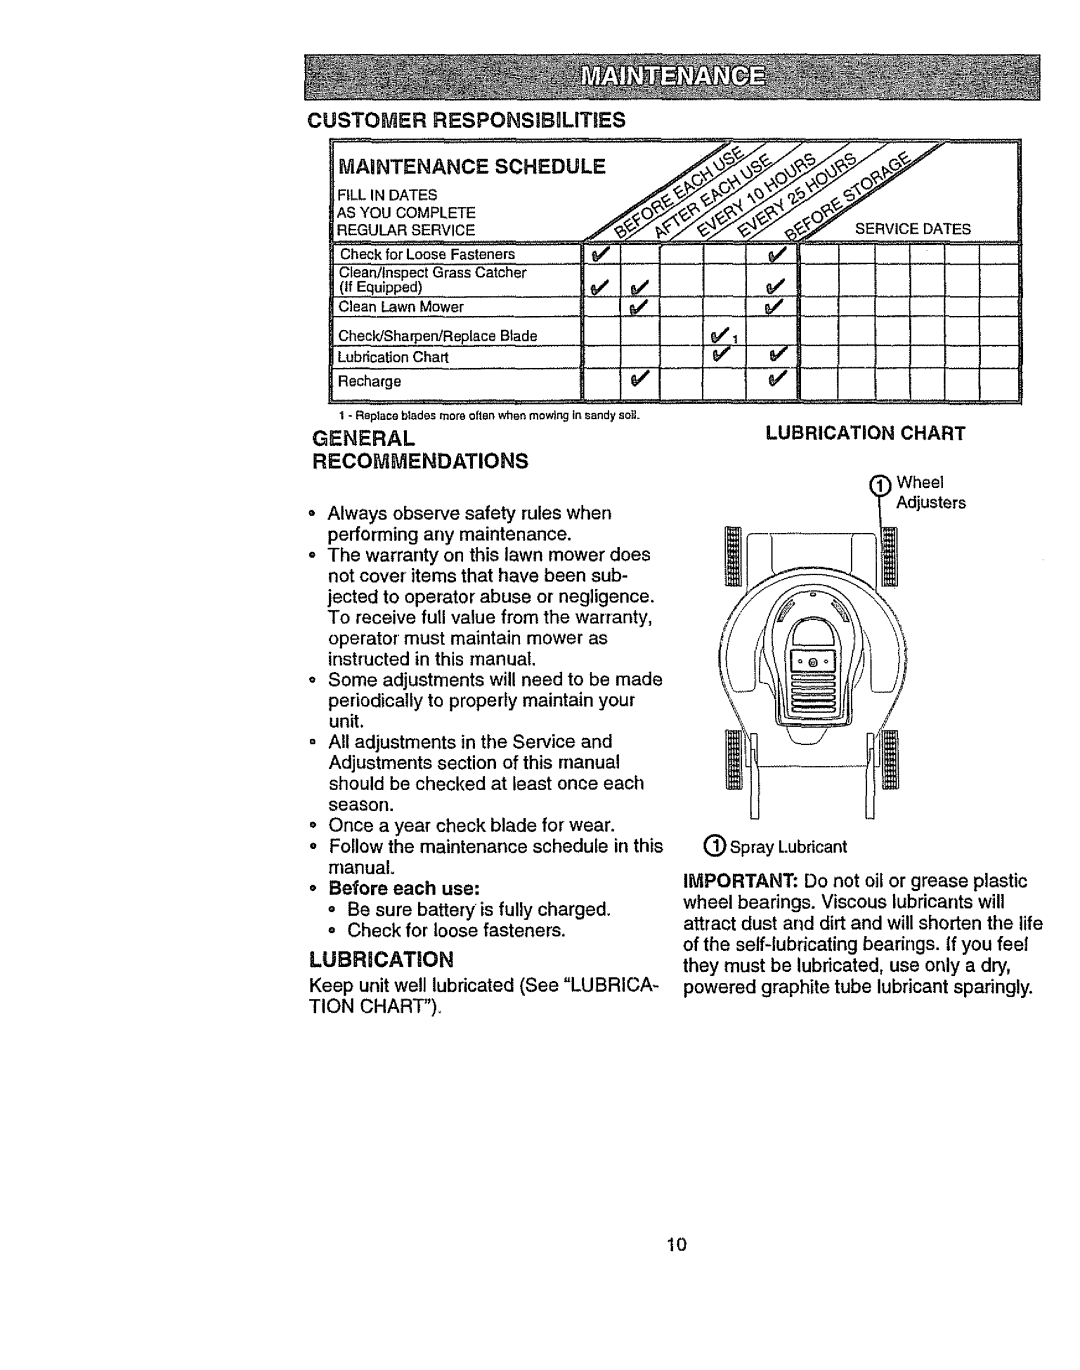 Craftsman 917.386411 Lubrication, ¥ooCOMPLETE, Keep unit well lubricated See LUBRICA_ TION CHART, General Recommendations 